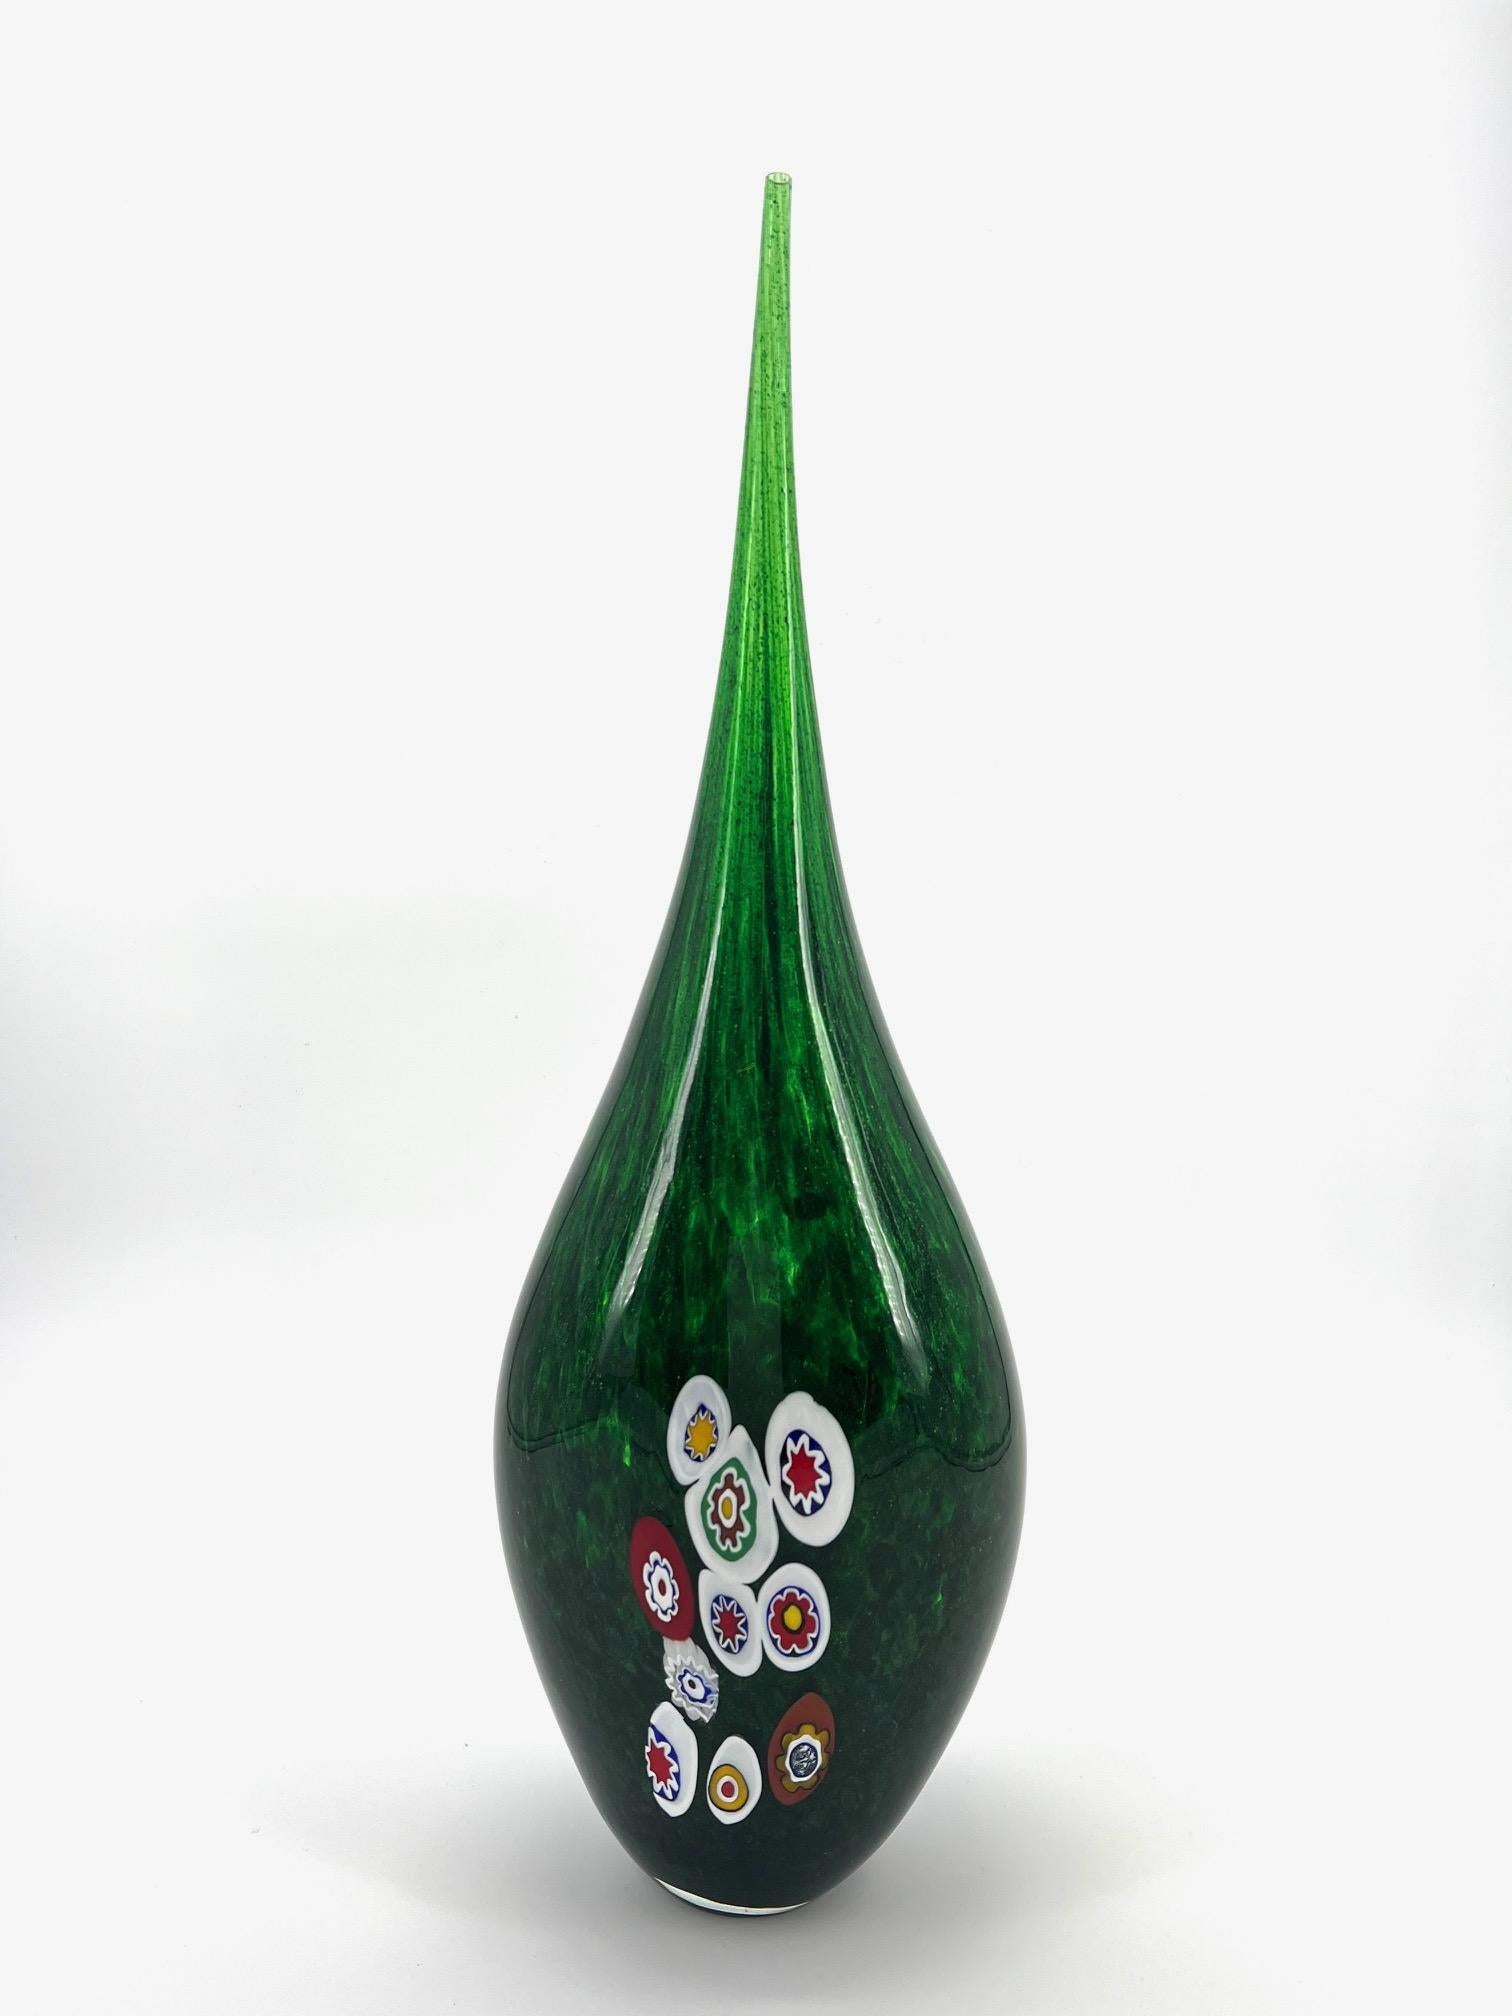 Our aim is the emotion through the creation of Murano glass artpieces.
 
This art-vase is made of Rare and Beautiful green Avventurina, that gives to this artpiece an amazing reflex, Murano multicolour Murrine complete the masterpiece.
it's made